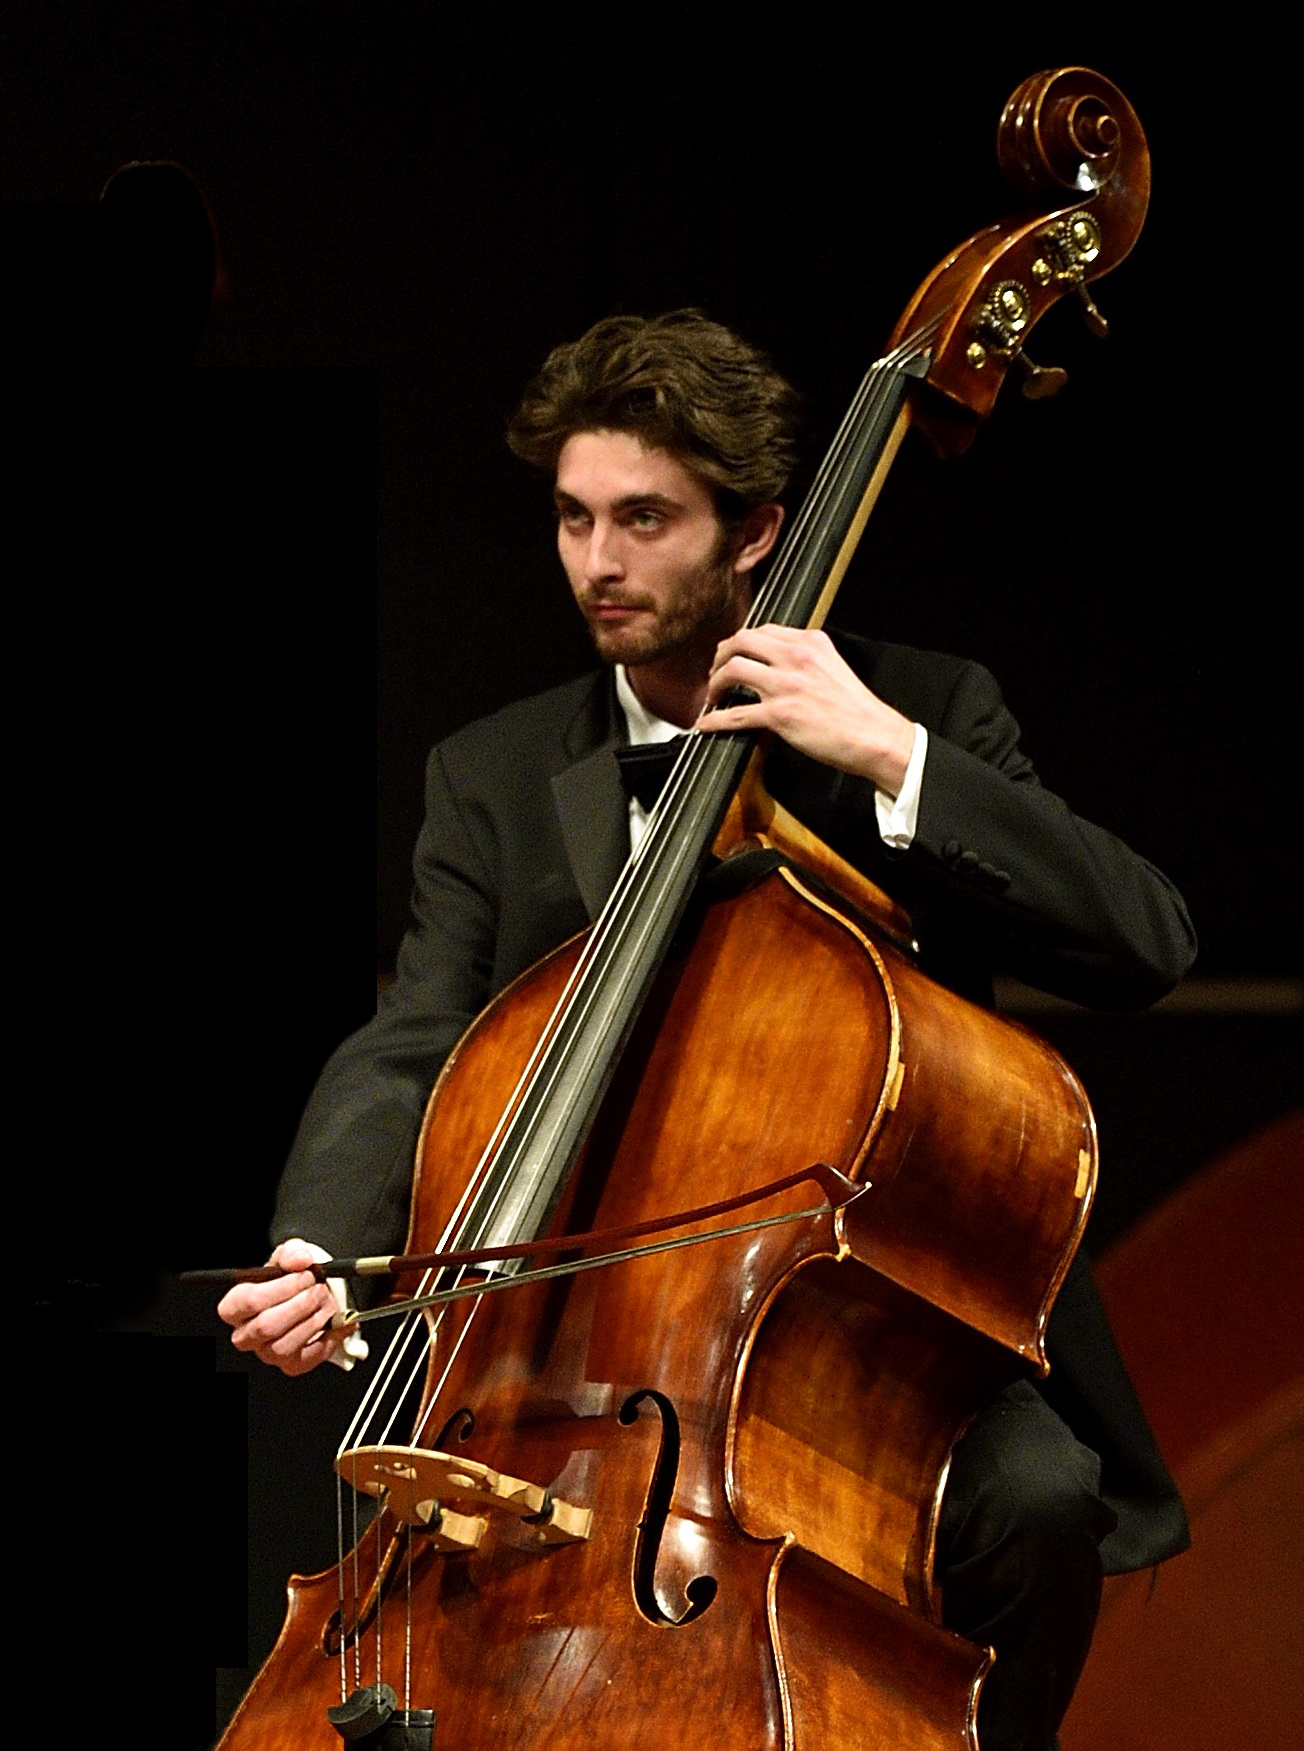 Double bass player in concert